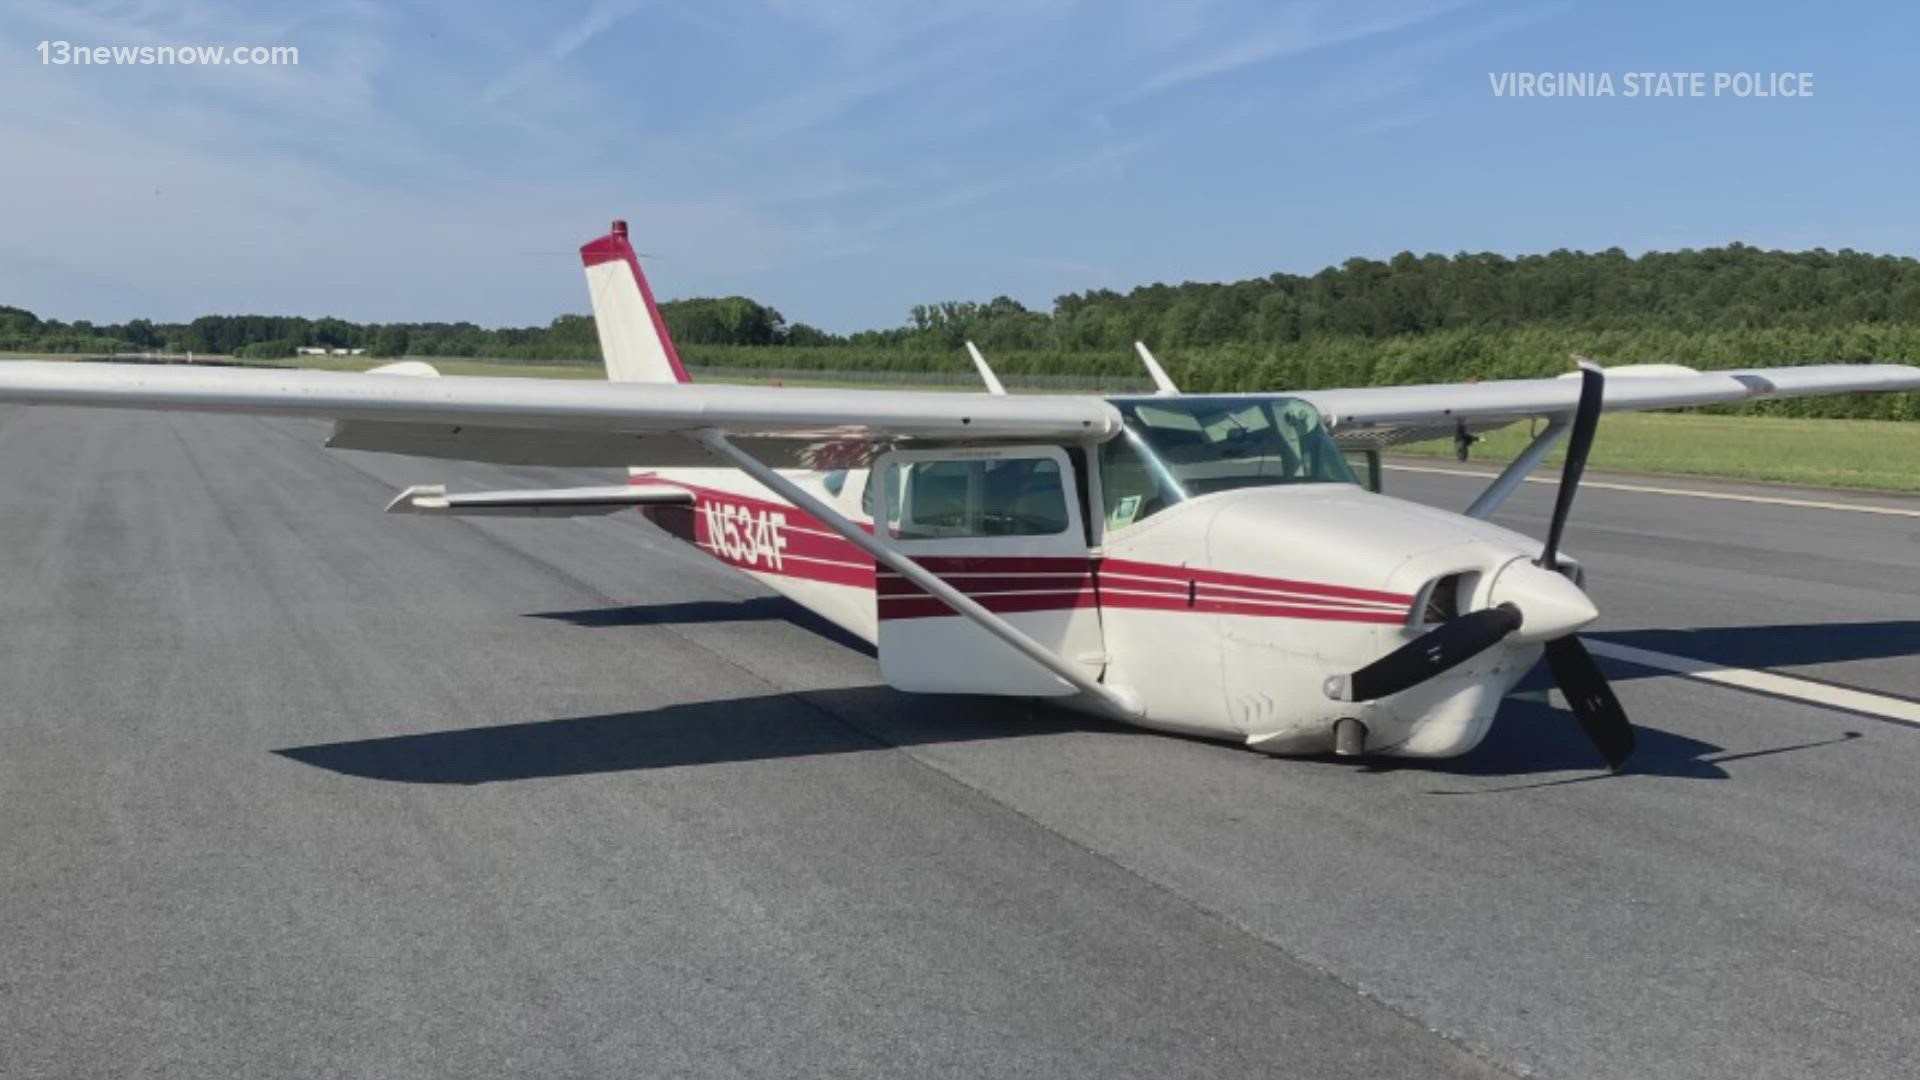 VSP said the plane failed to deploy its landing gear due to a mechanical issue before landing on the runway.